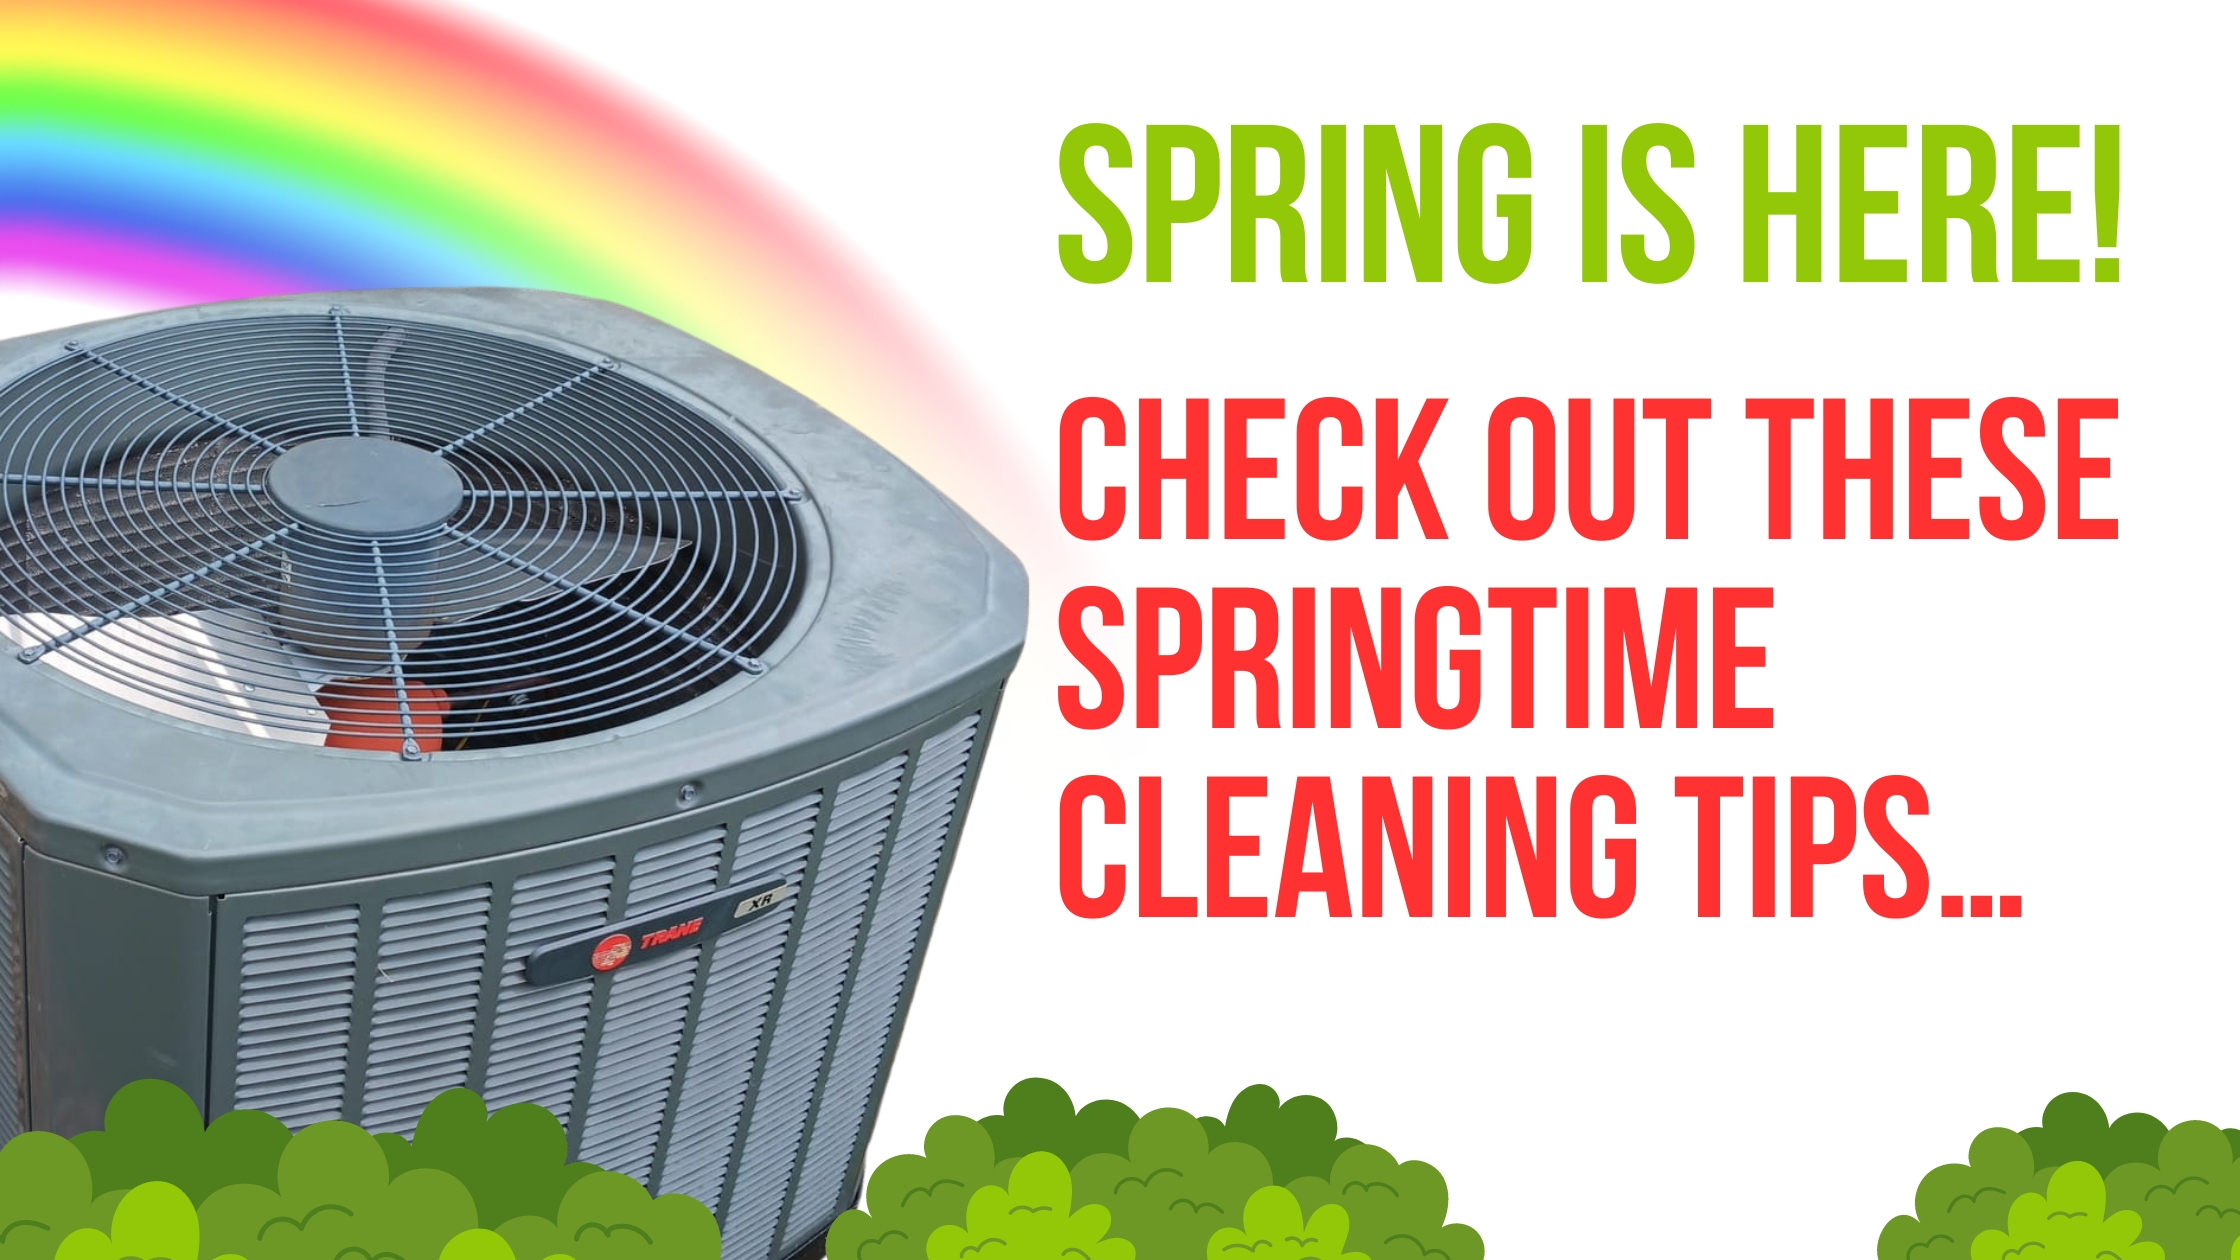 Spring Is Here! Check Out These Springtime Cleaning Tips…